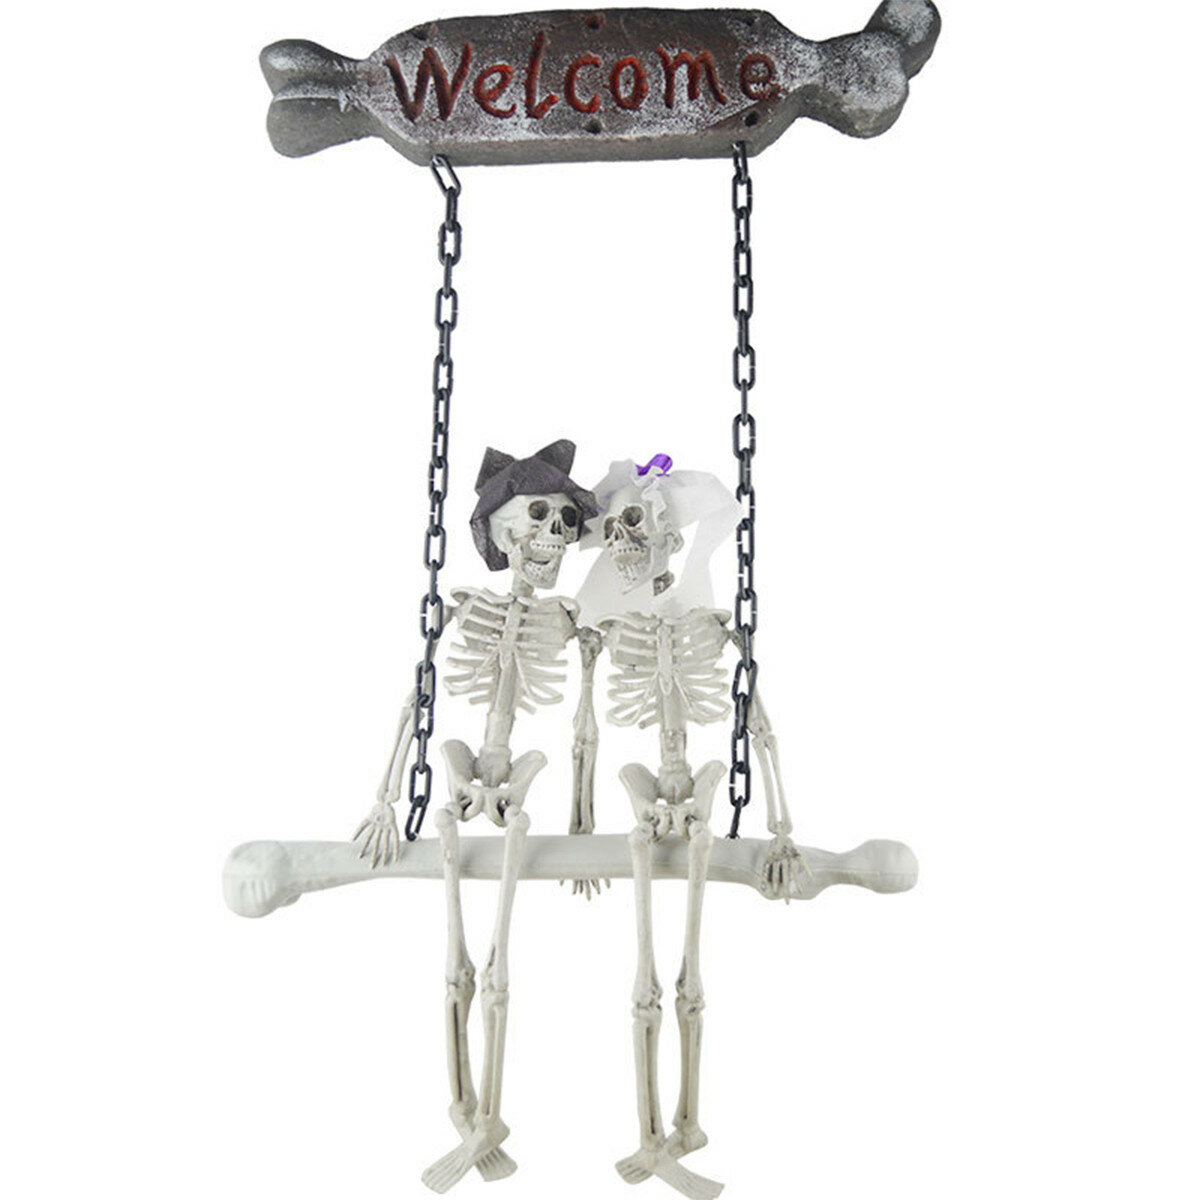 

Halloween Decorations Couple Skeleton Hanging Ghost Prop Scary Haunted House Outdoor Indoor - White